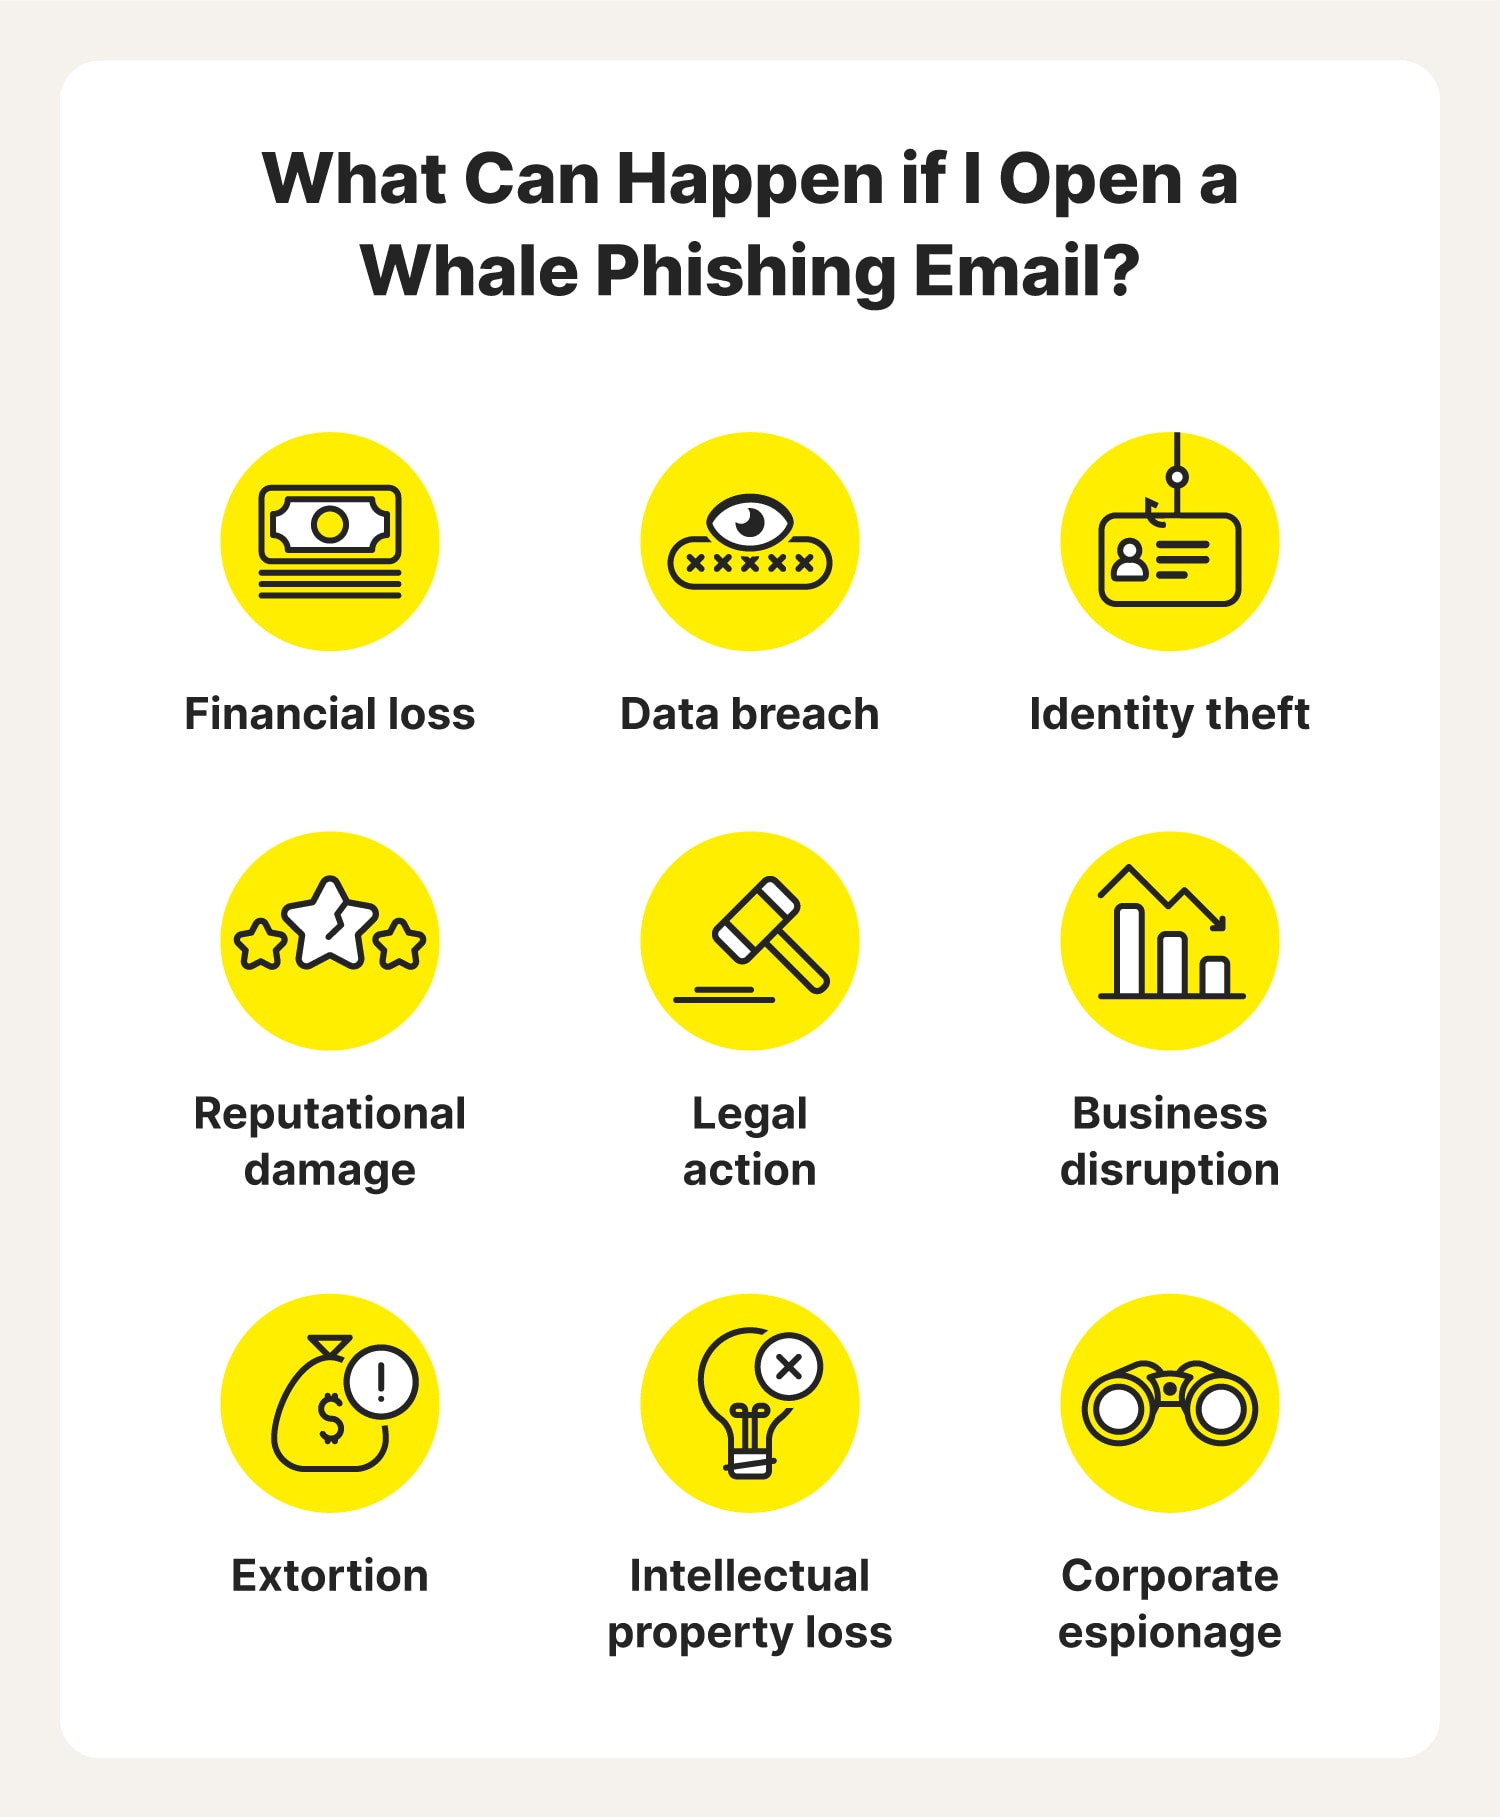 An overview of the repercussions you may experience if you open a whale phishing email.